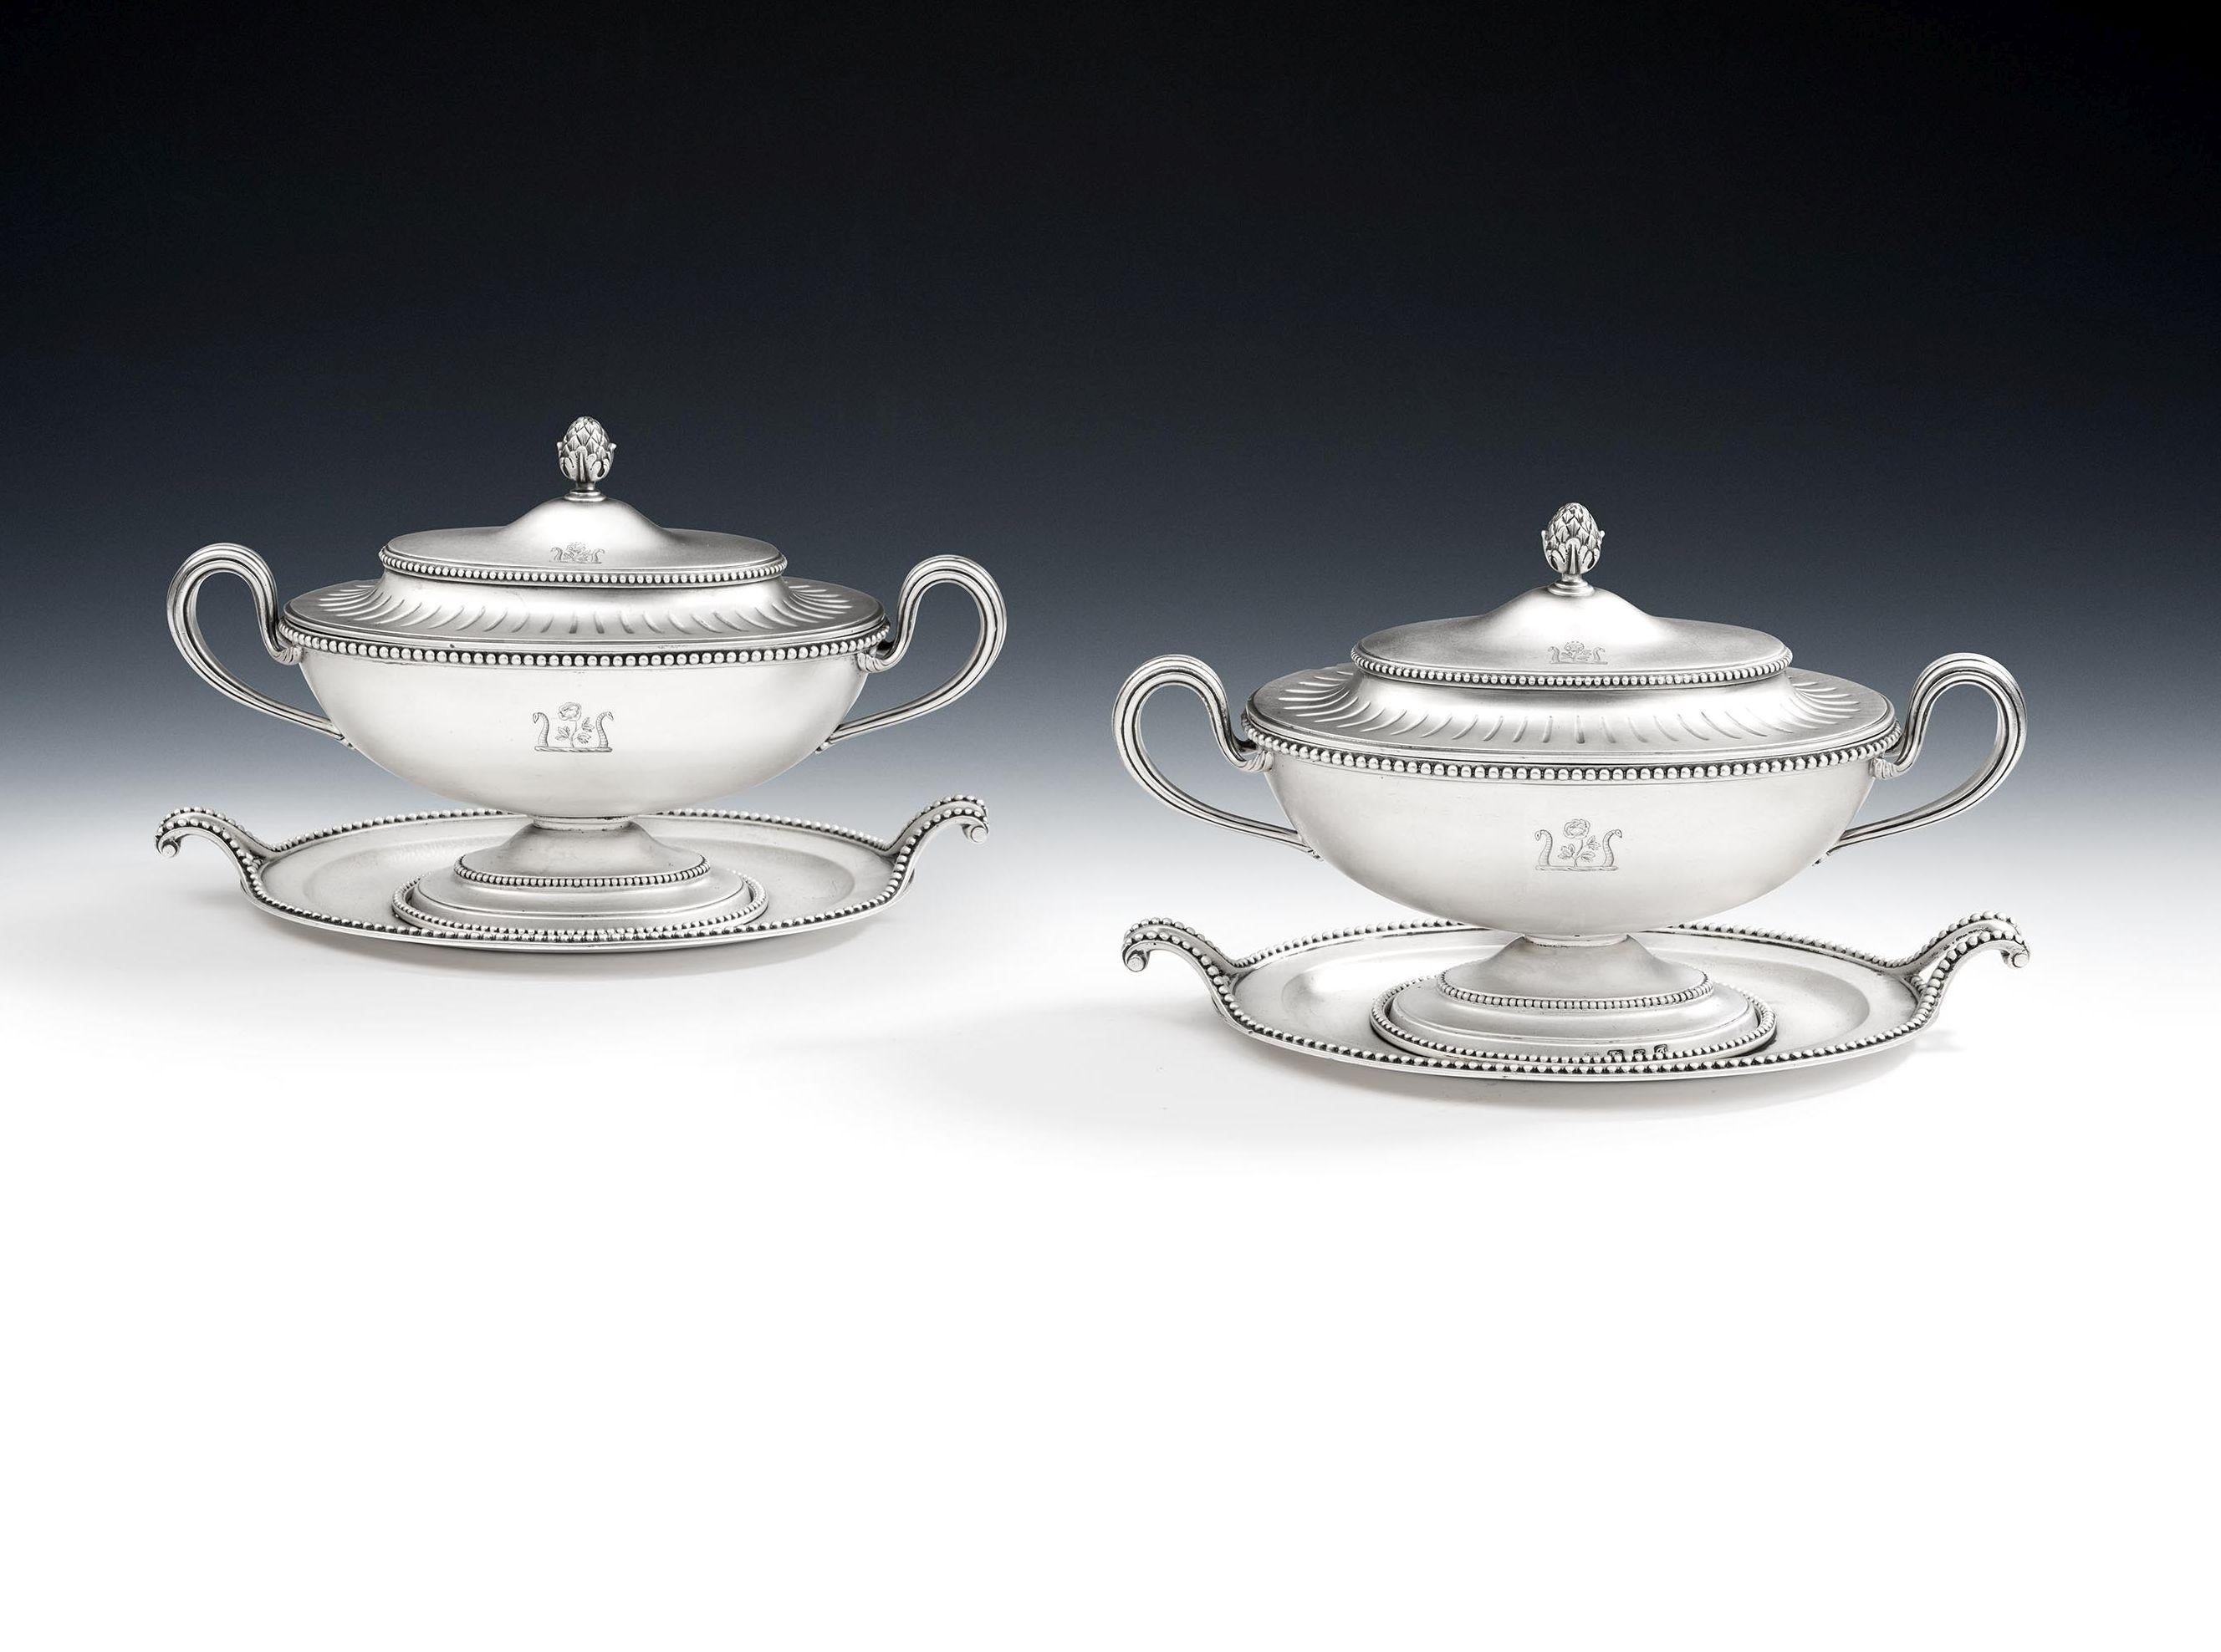 AN IMPORTANT & VERY RARE PAIR OF GEORGE III ANTIQUE STERLING SILVER SAUCE TUREENS, WITH THEIR ORIGINAL STANDS, MADE IN LONDON IN 1773/74 BY SEBASTIAN & JAMES CRESPEL.

The Tureens are modelled in the Neo Classical 